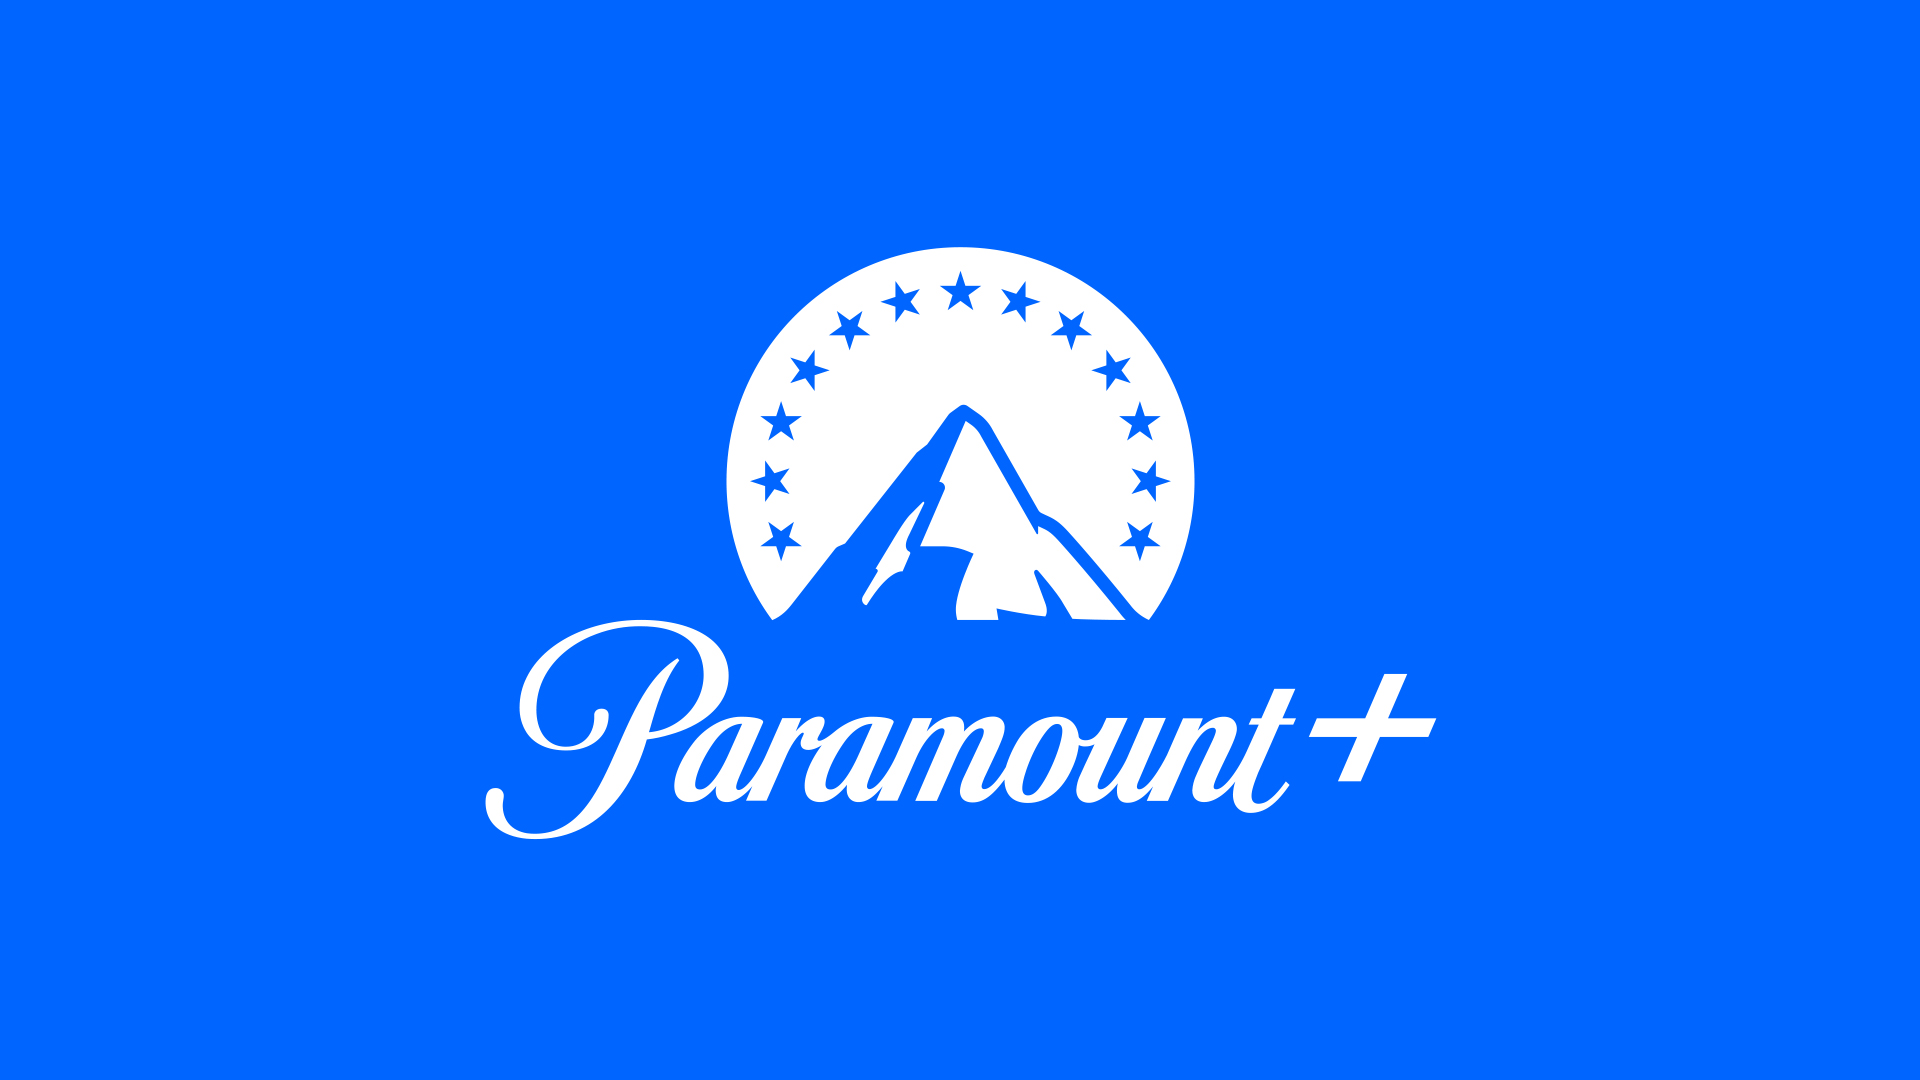 Paramount+ Launches Today: What to Know About the New Streaming Service